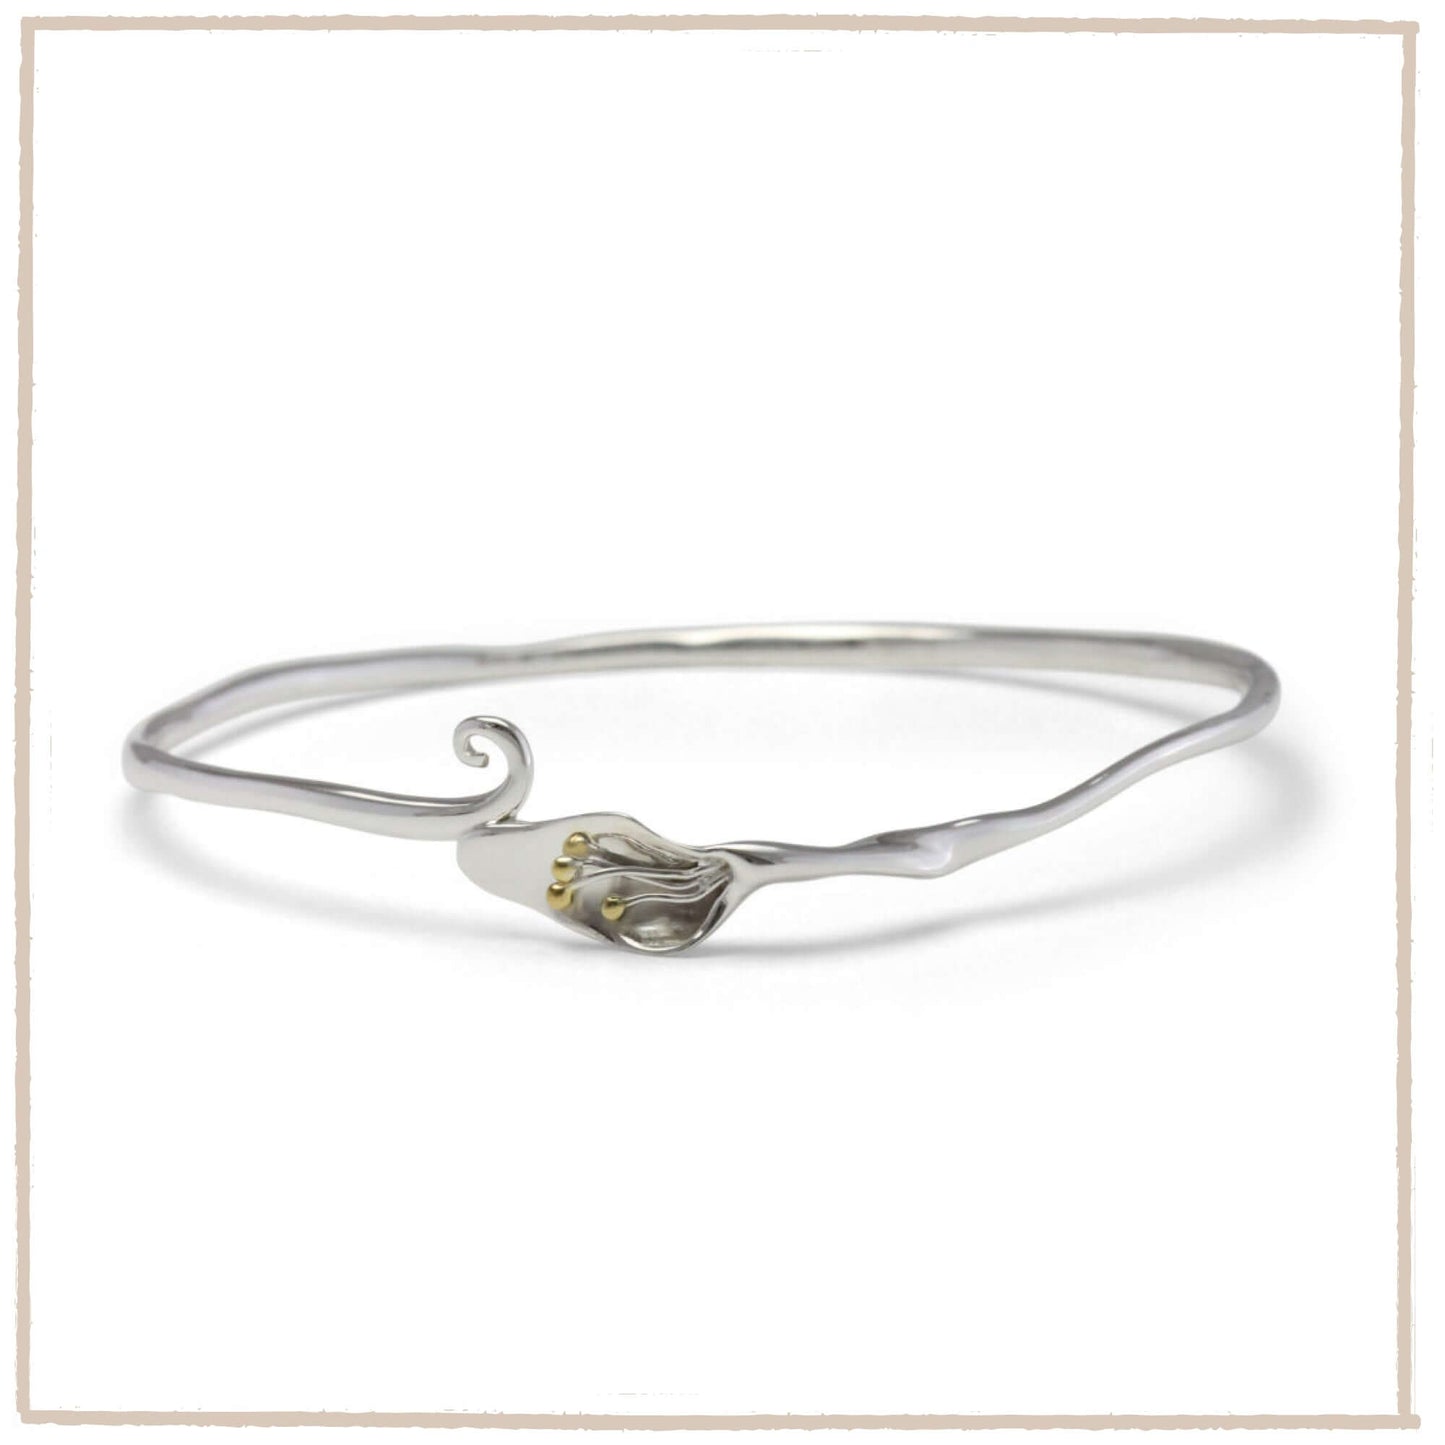 Elegant Calla Lily Bangle Handmade In Sterling Silver & 14 Carat Gold - Twelve Silver Trees